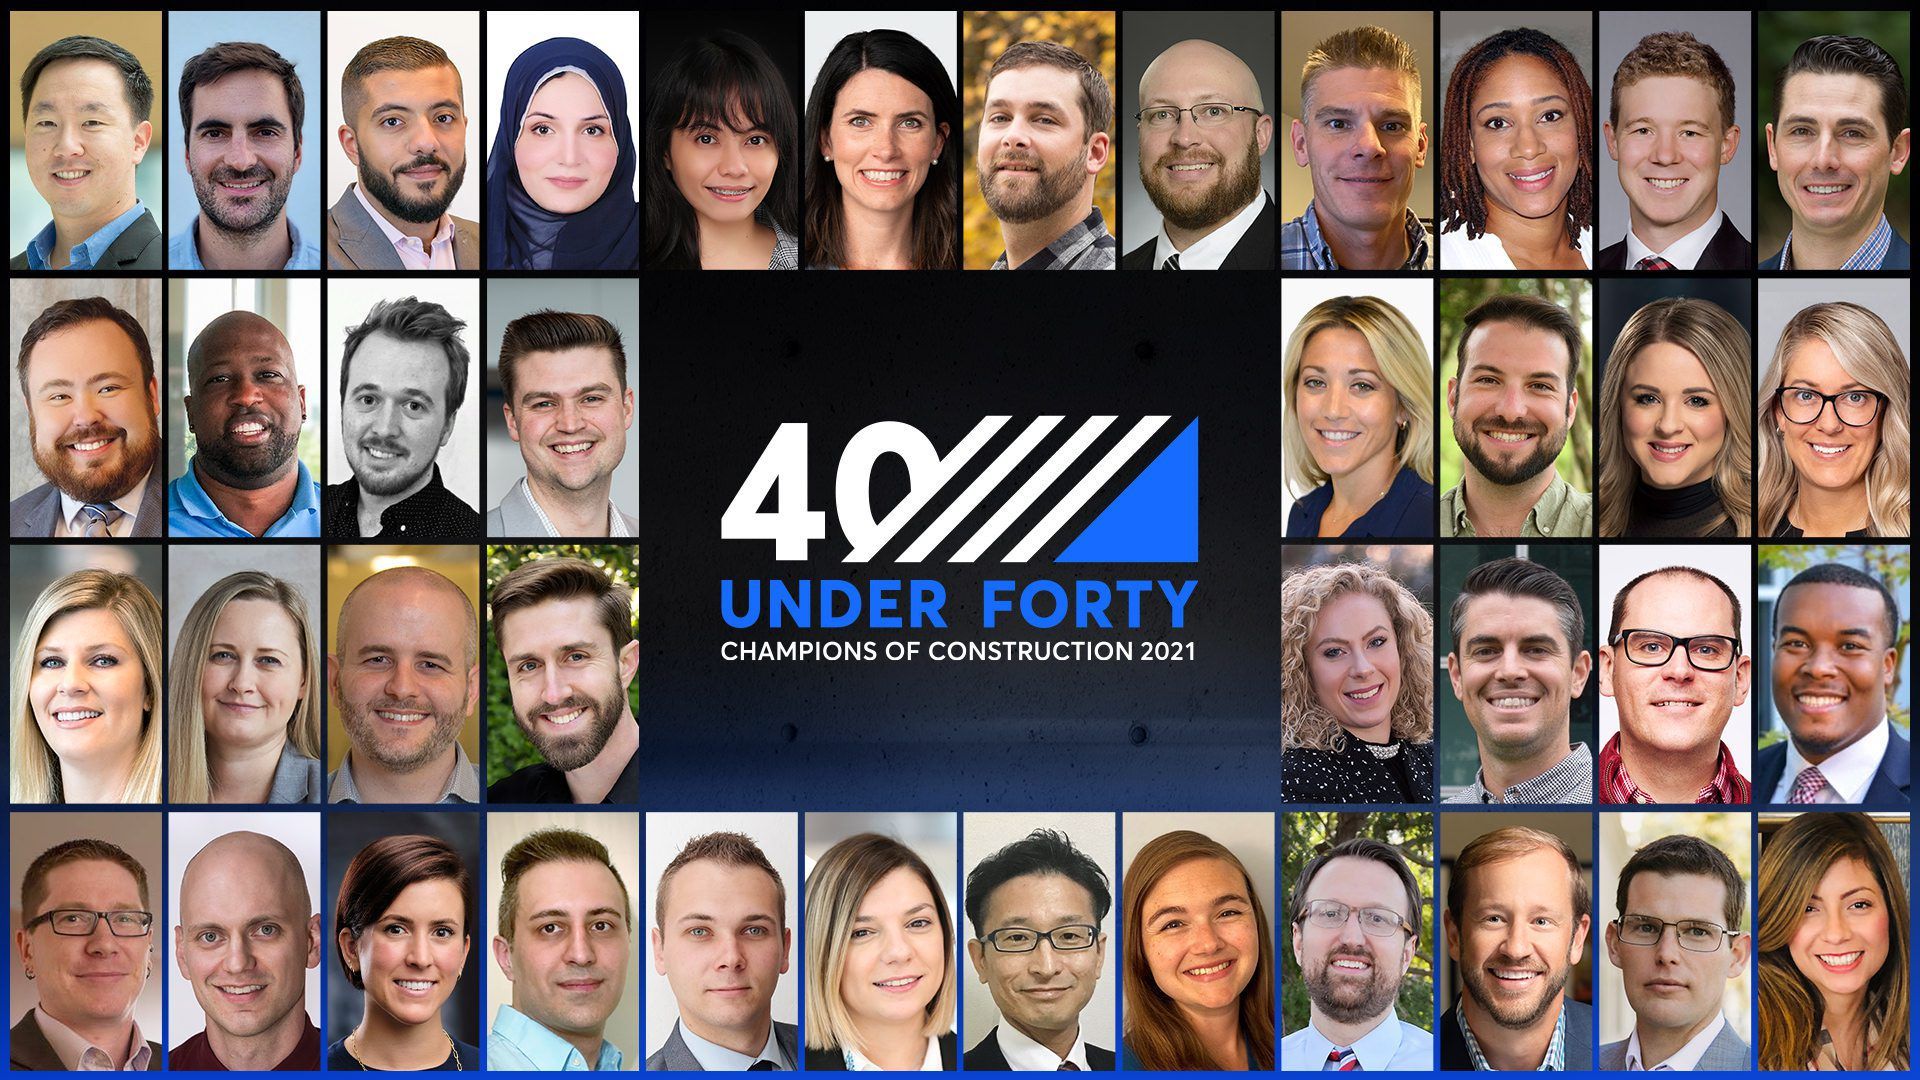 Autodesk's 40 Under 40: Champions of Construction 2021